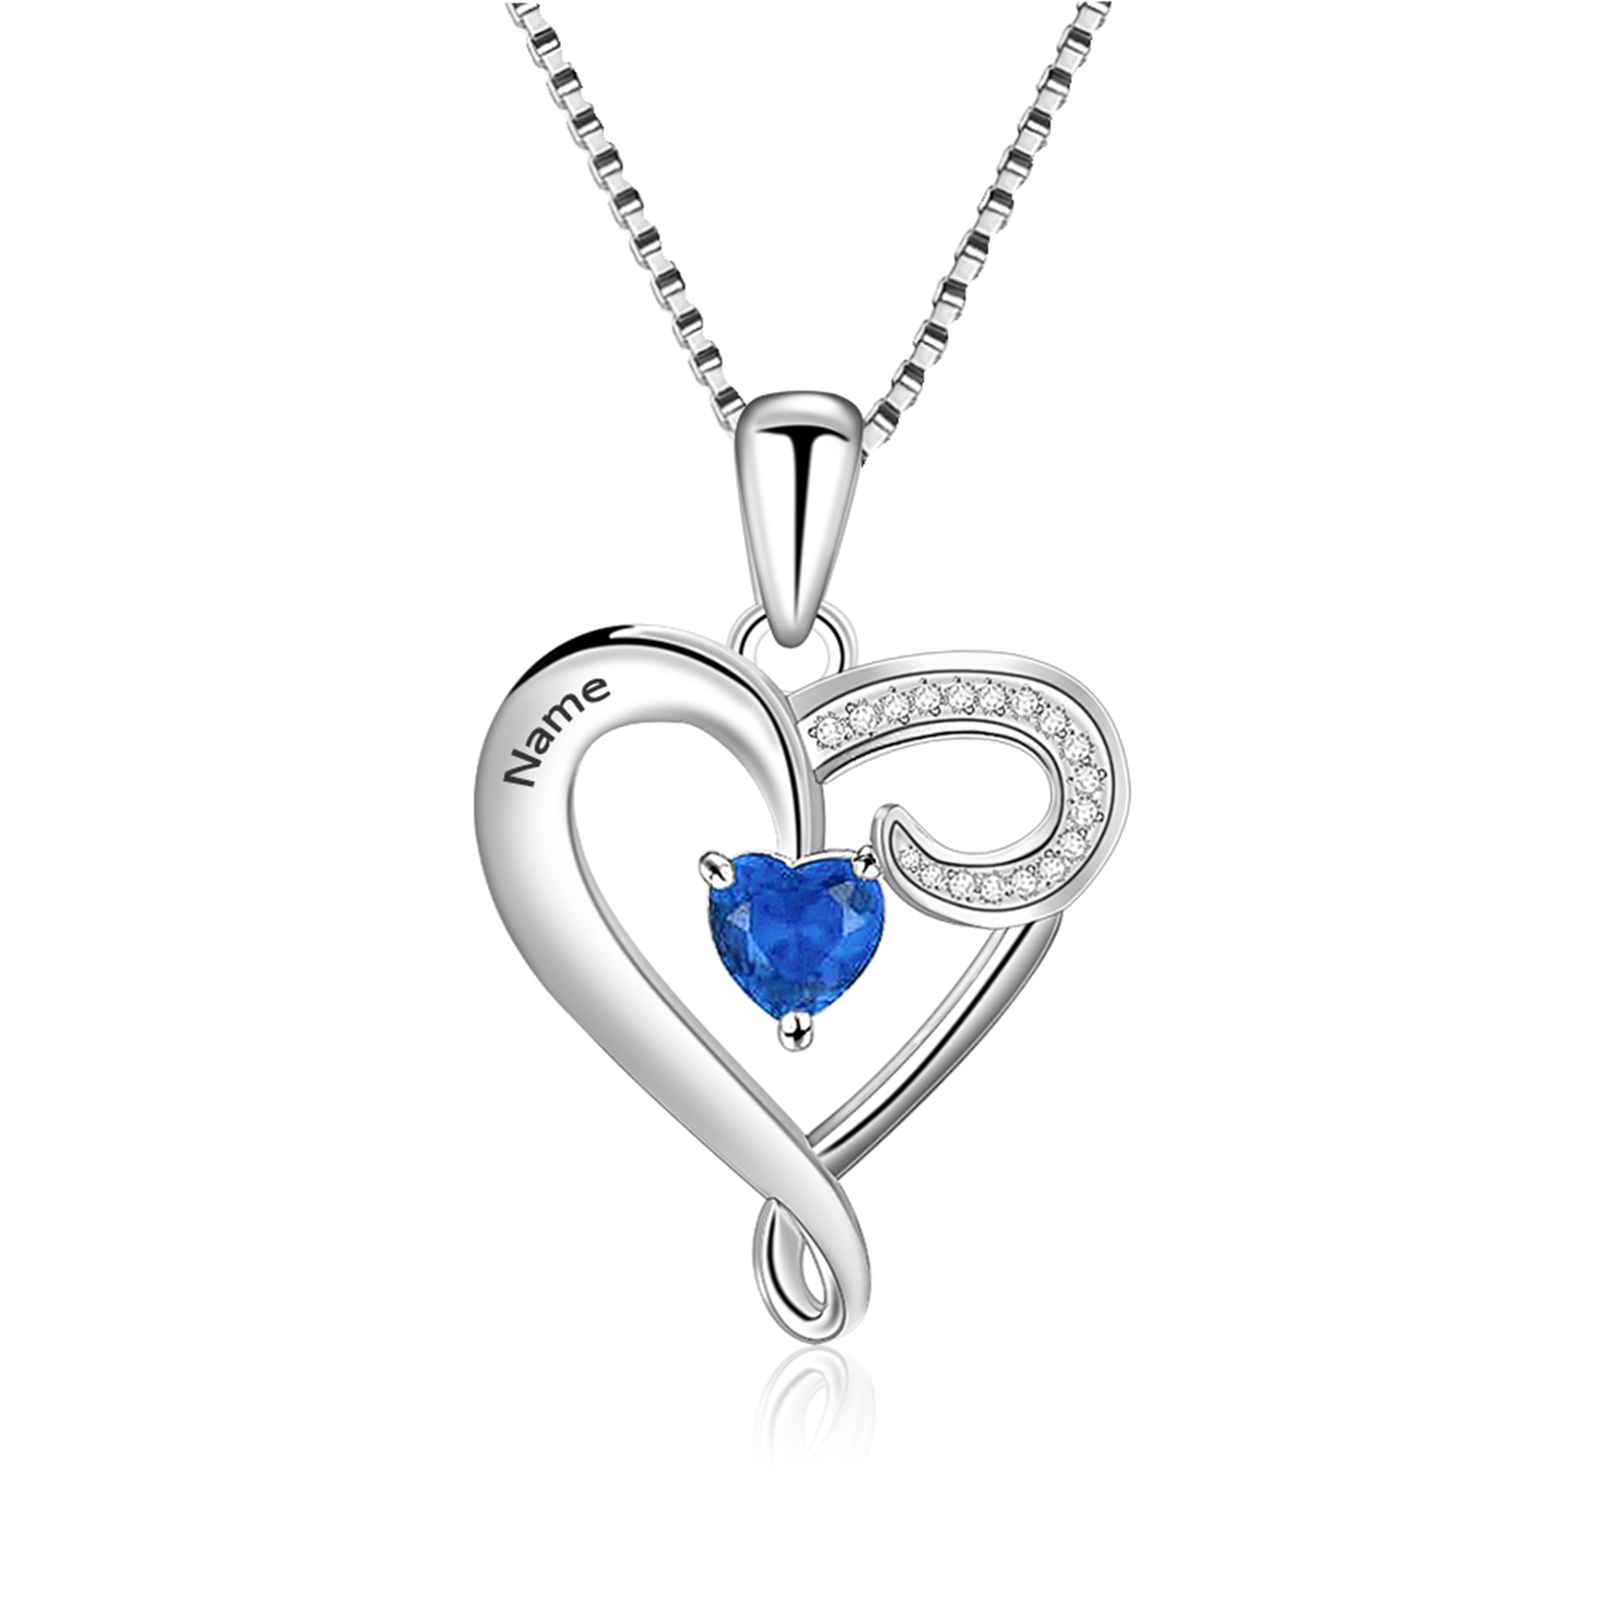 Love Heart Pendant Necklace Name Necklace with Engraving